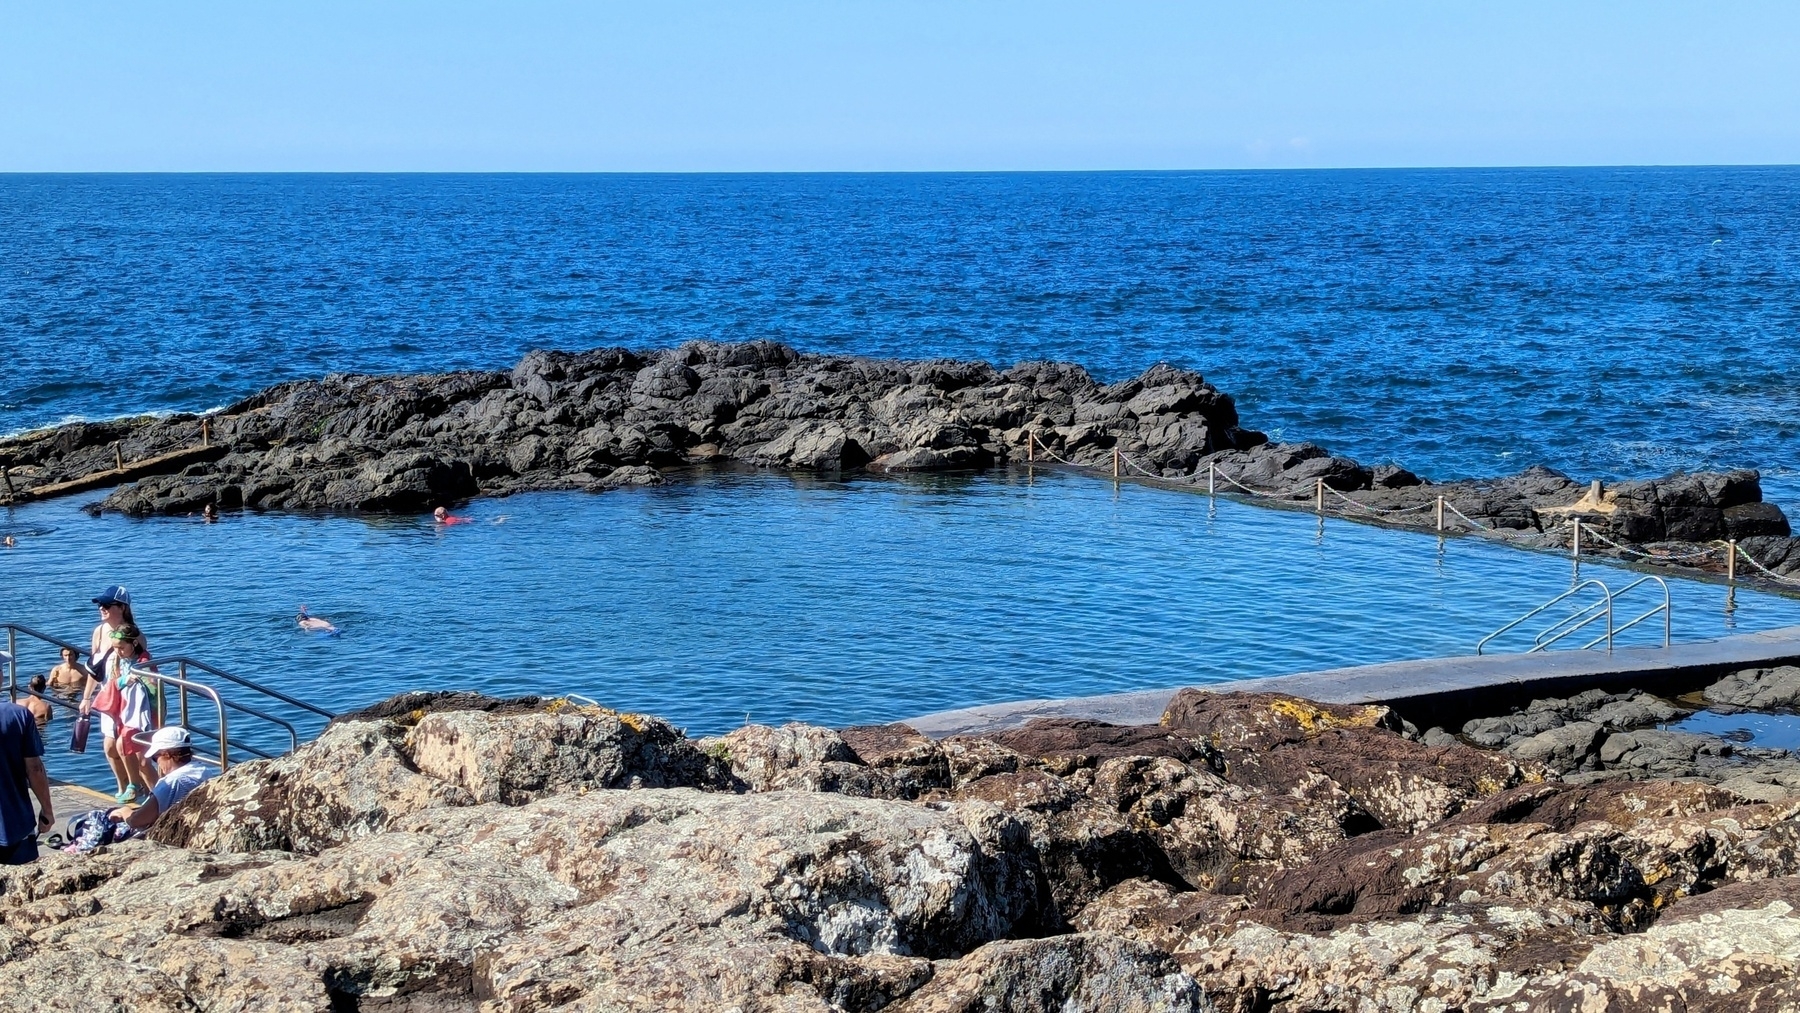 A rock swimming  pool with the ocean in the background. The water looks very blue.